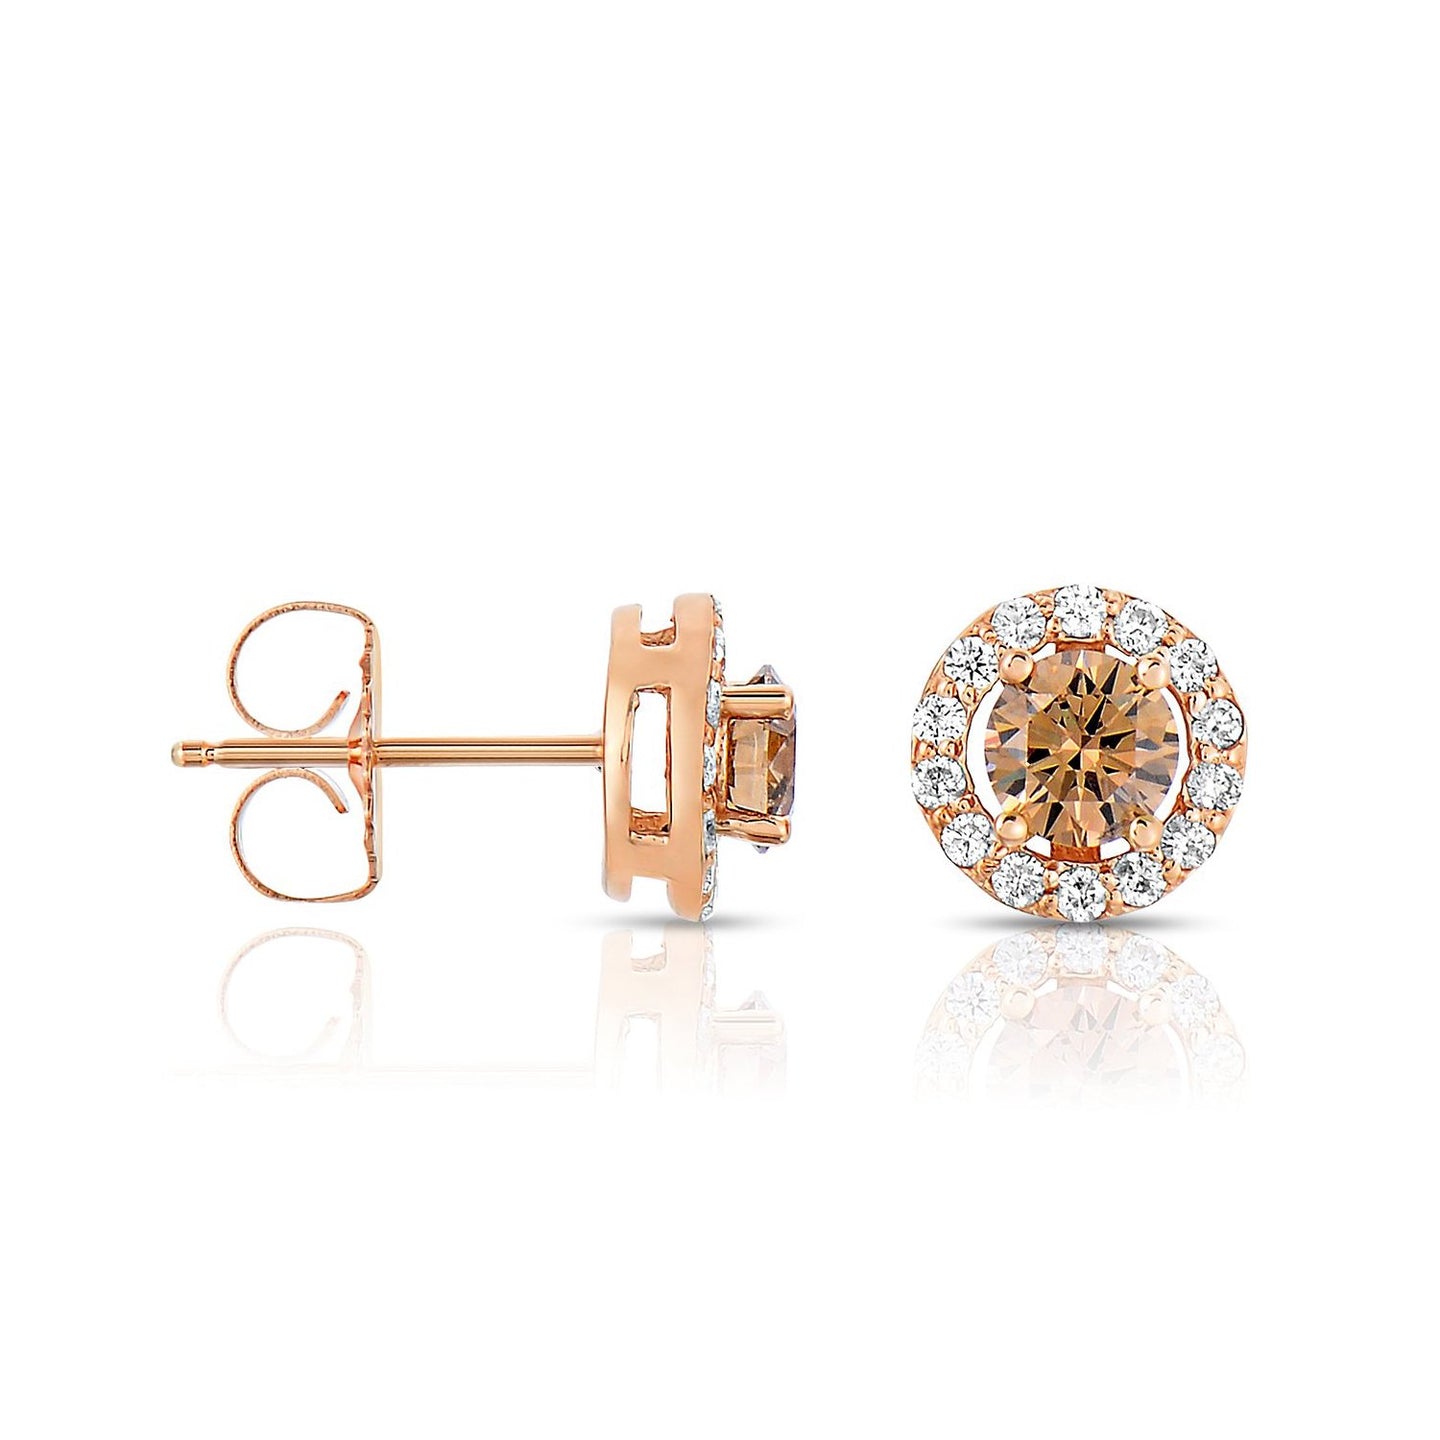 Sabel Collection 14K Rose Gold Mocha and White Diamond Stud Earrings